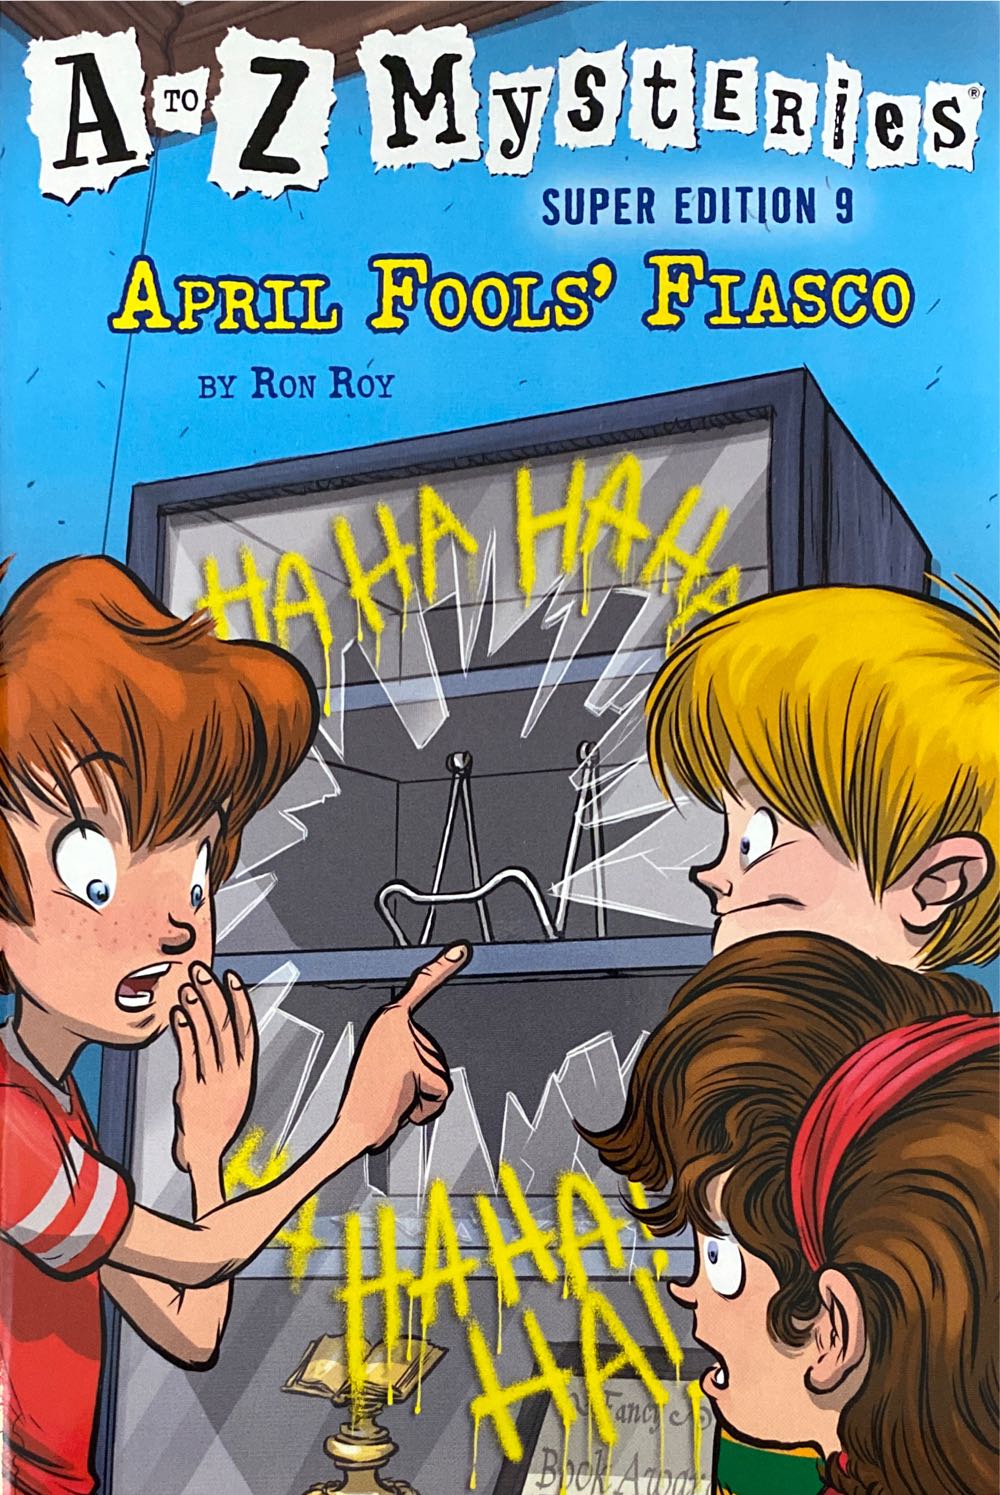 A to Z Mysteries Super Edition #9: April Fools’ Fiasco - Ron Roy (Random House Children’s Books - Paperback) book collectible [Barcode 9780399551956] - Main Image 1